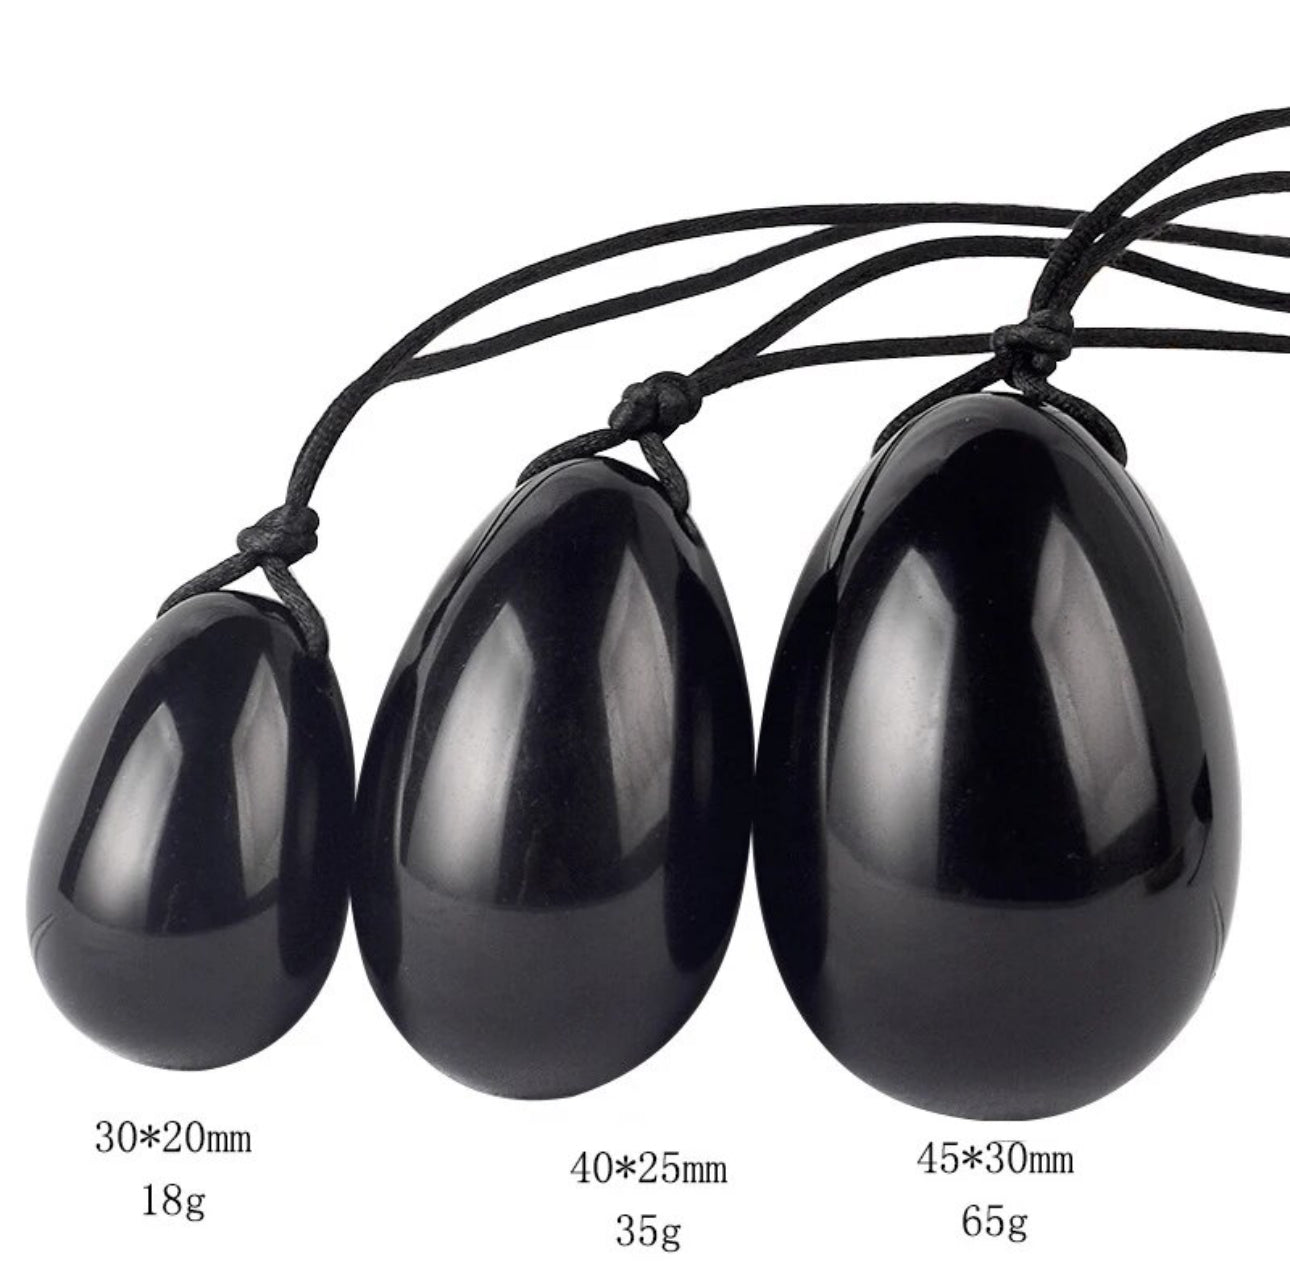 Black Obsidian Yoni Egg Set: Strengthen your pelvic floor with the natural Yoni egg (eggs in 3 sizes)